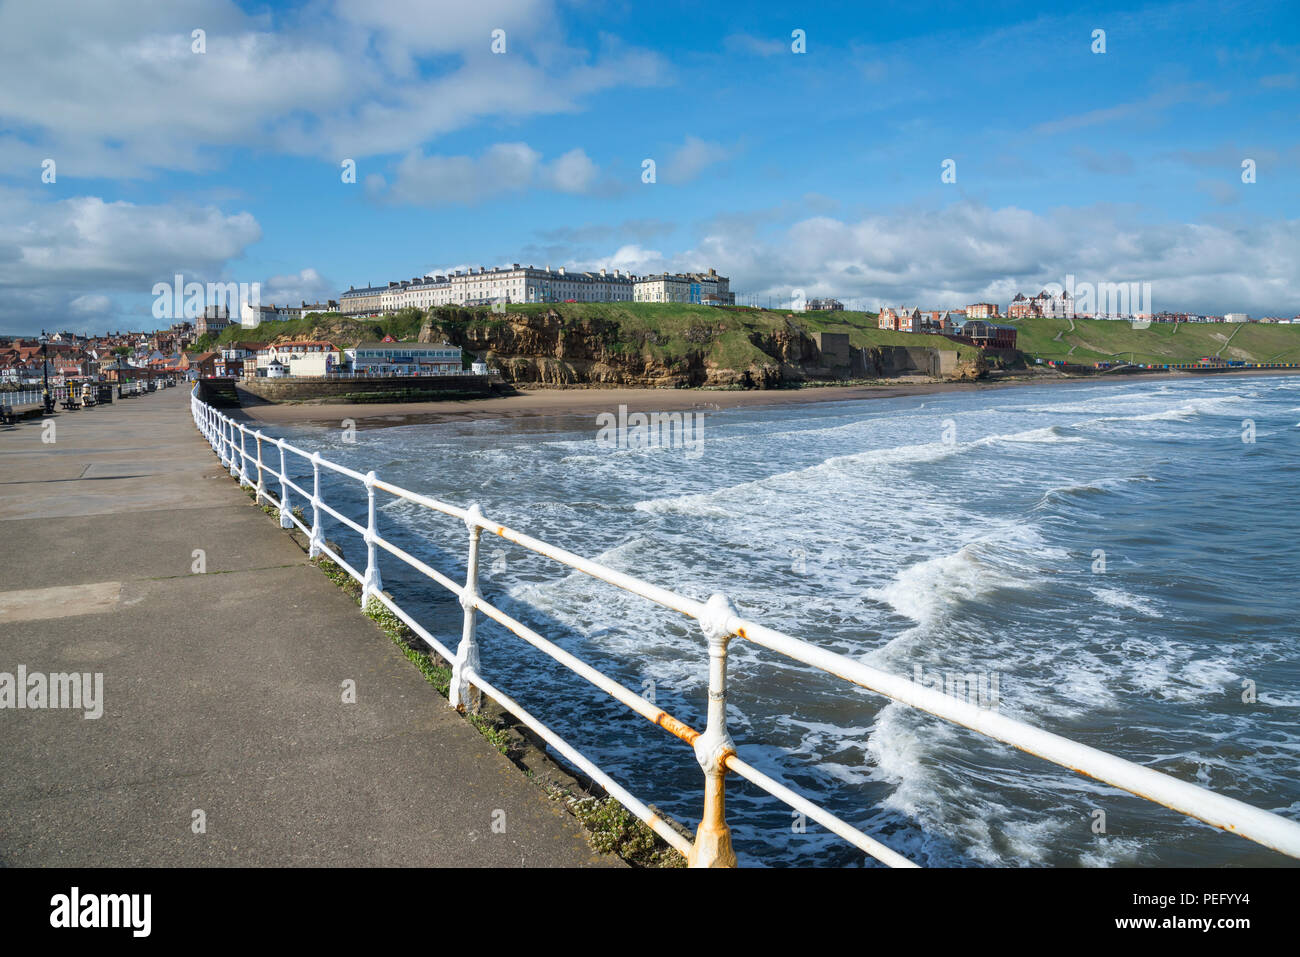 A sunny spring morning on the West Pier at Whitby, North Yorkshire, England. Stock Photo